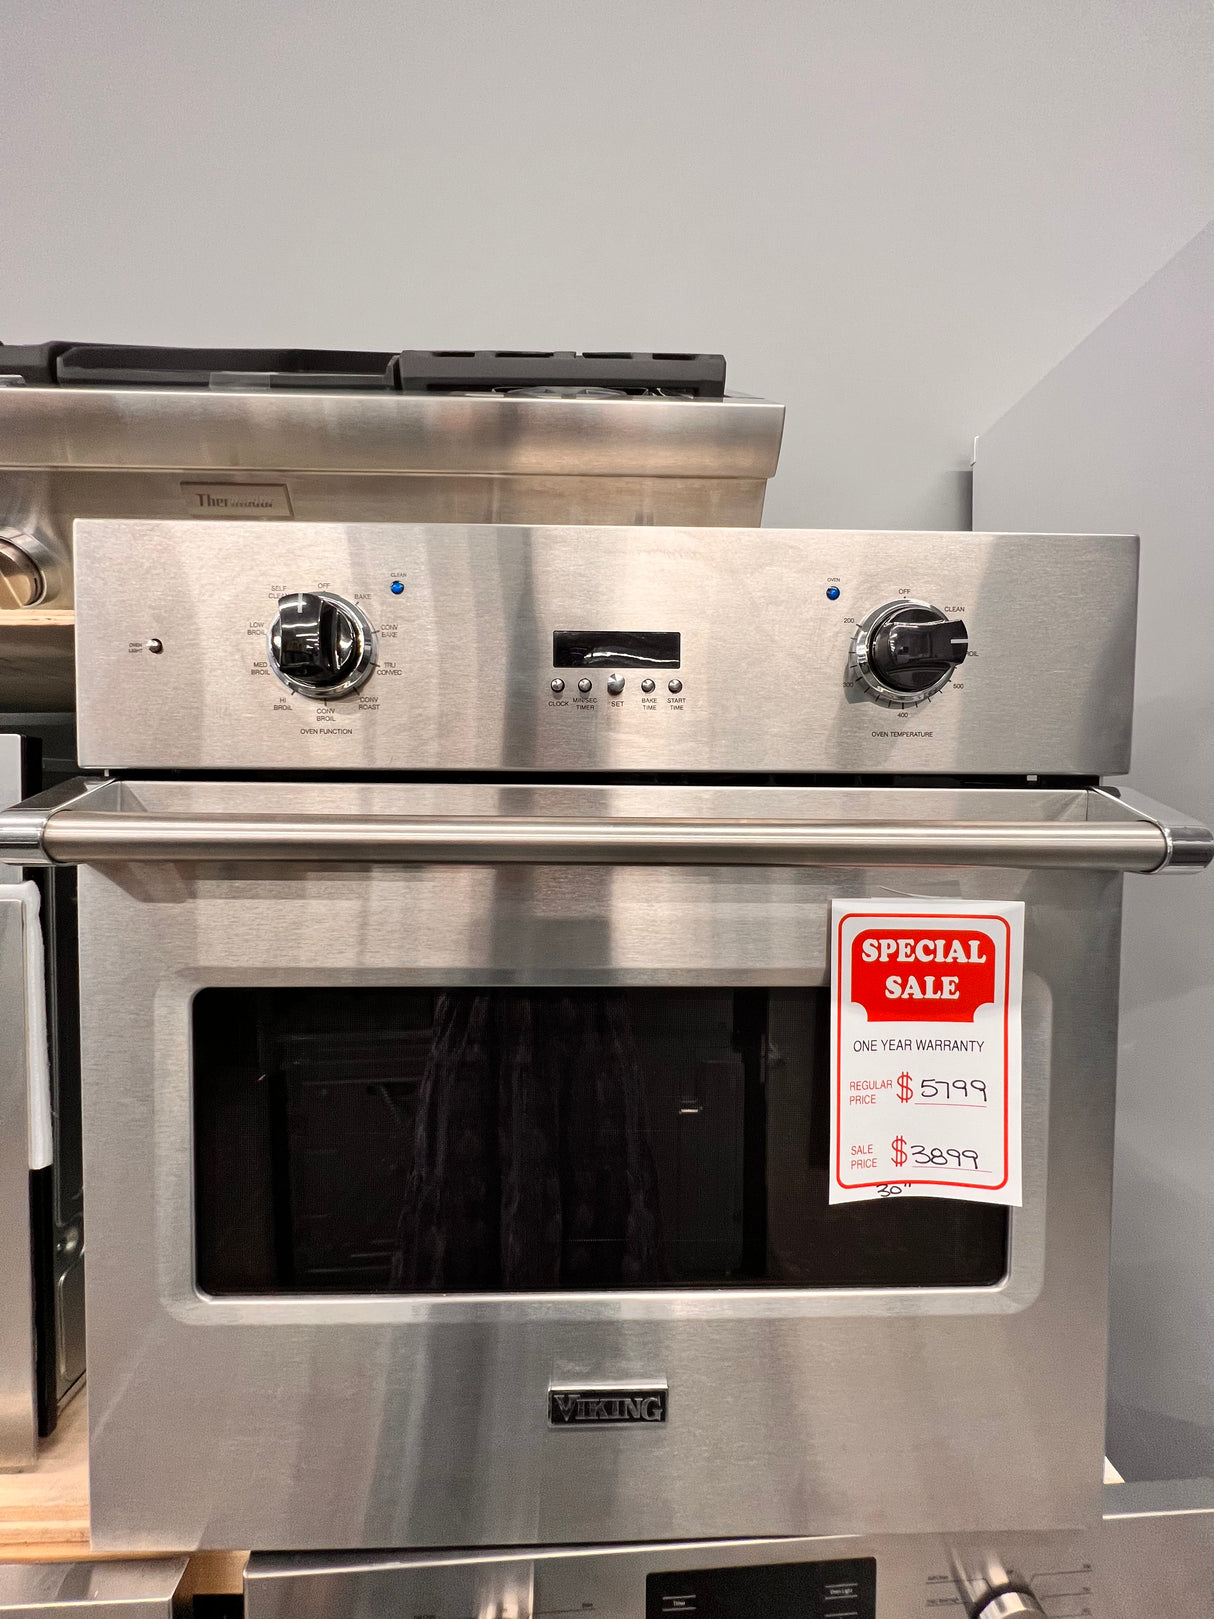 VIKING SINGLE WALL OVEN STAINLESS STEEL.